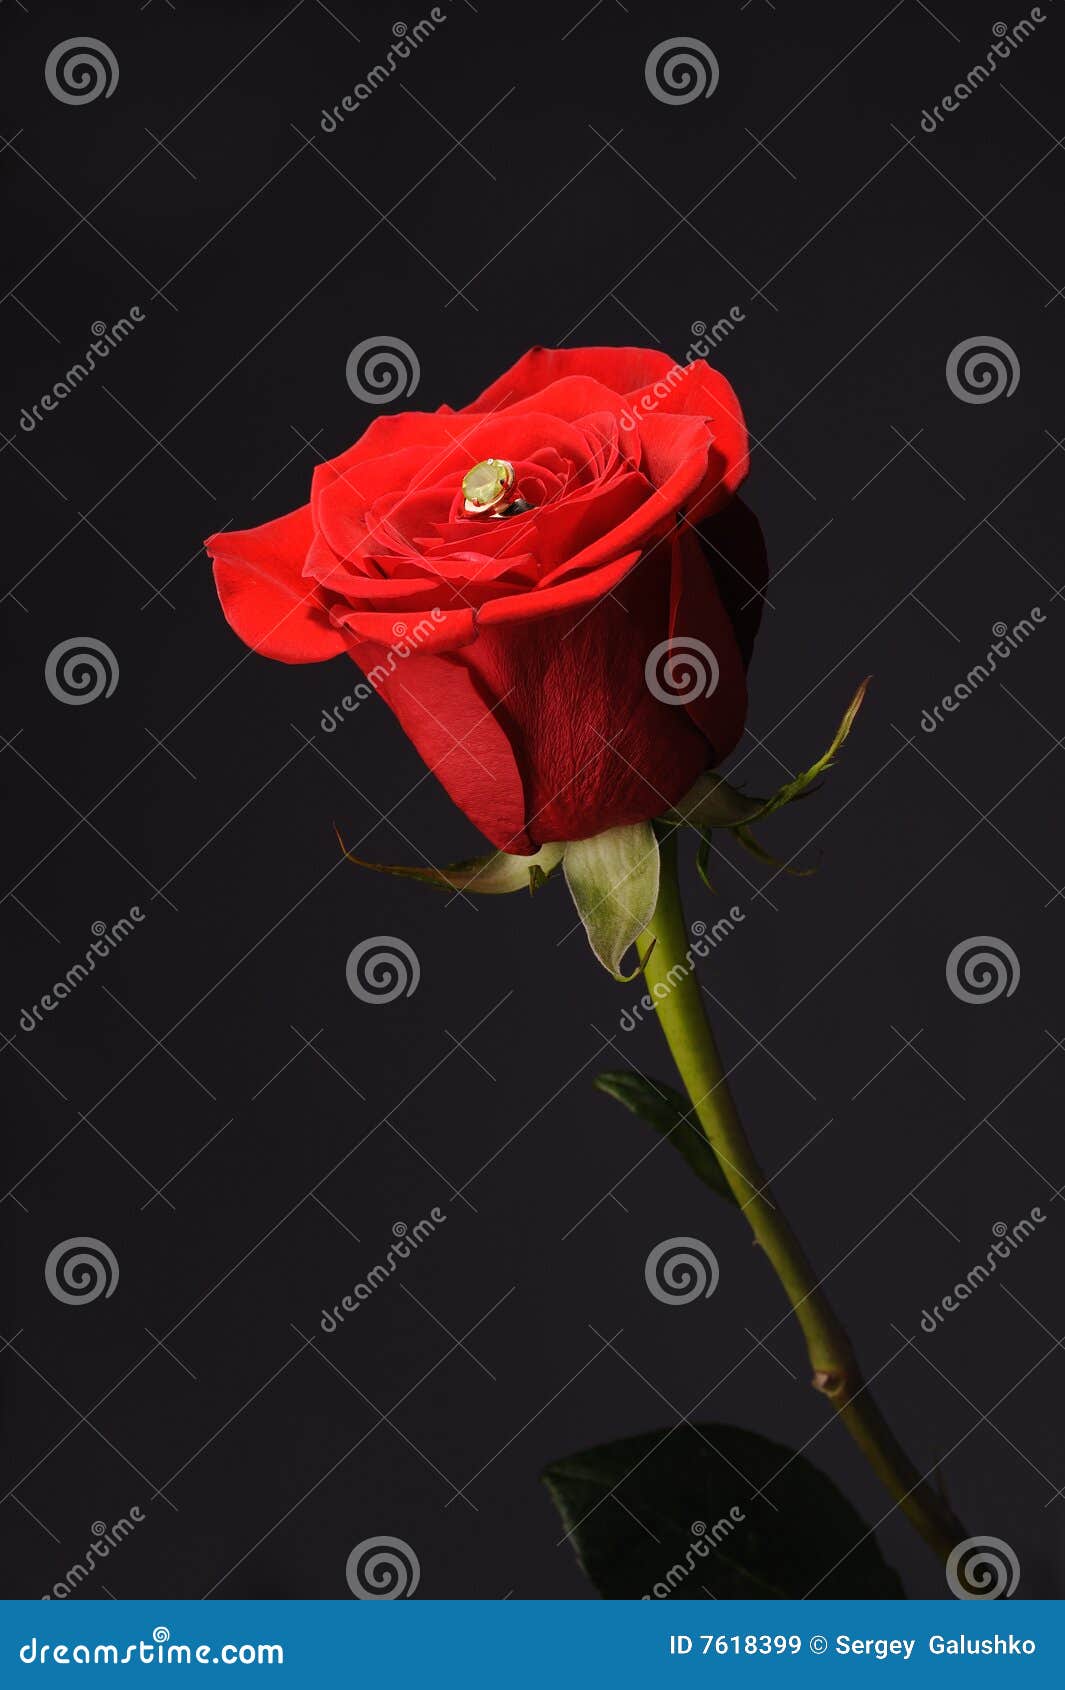 ring in a red rose wrom black background